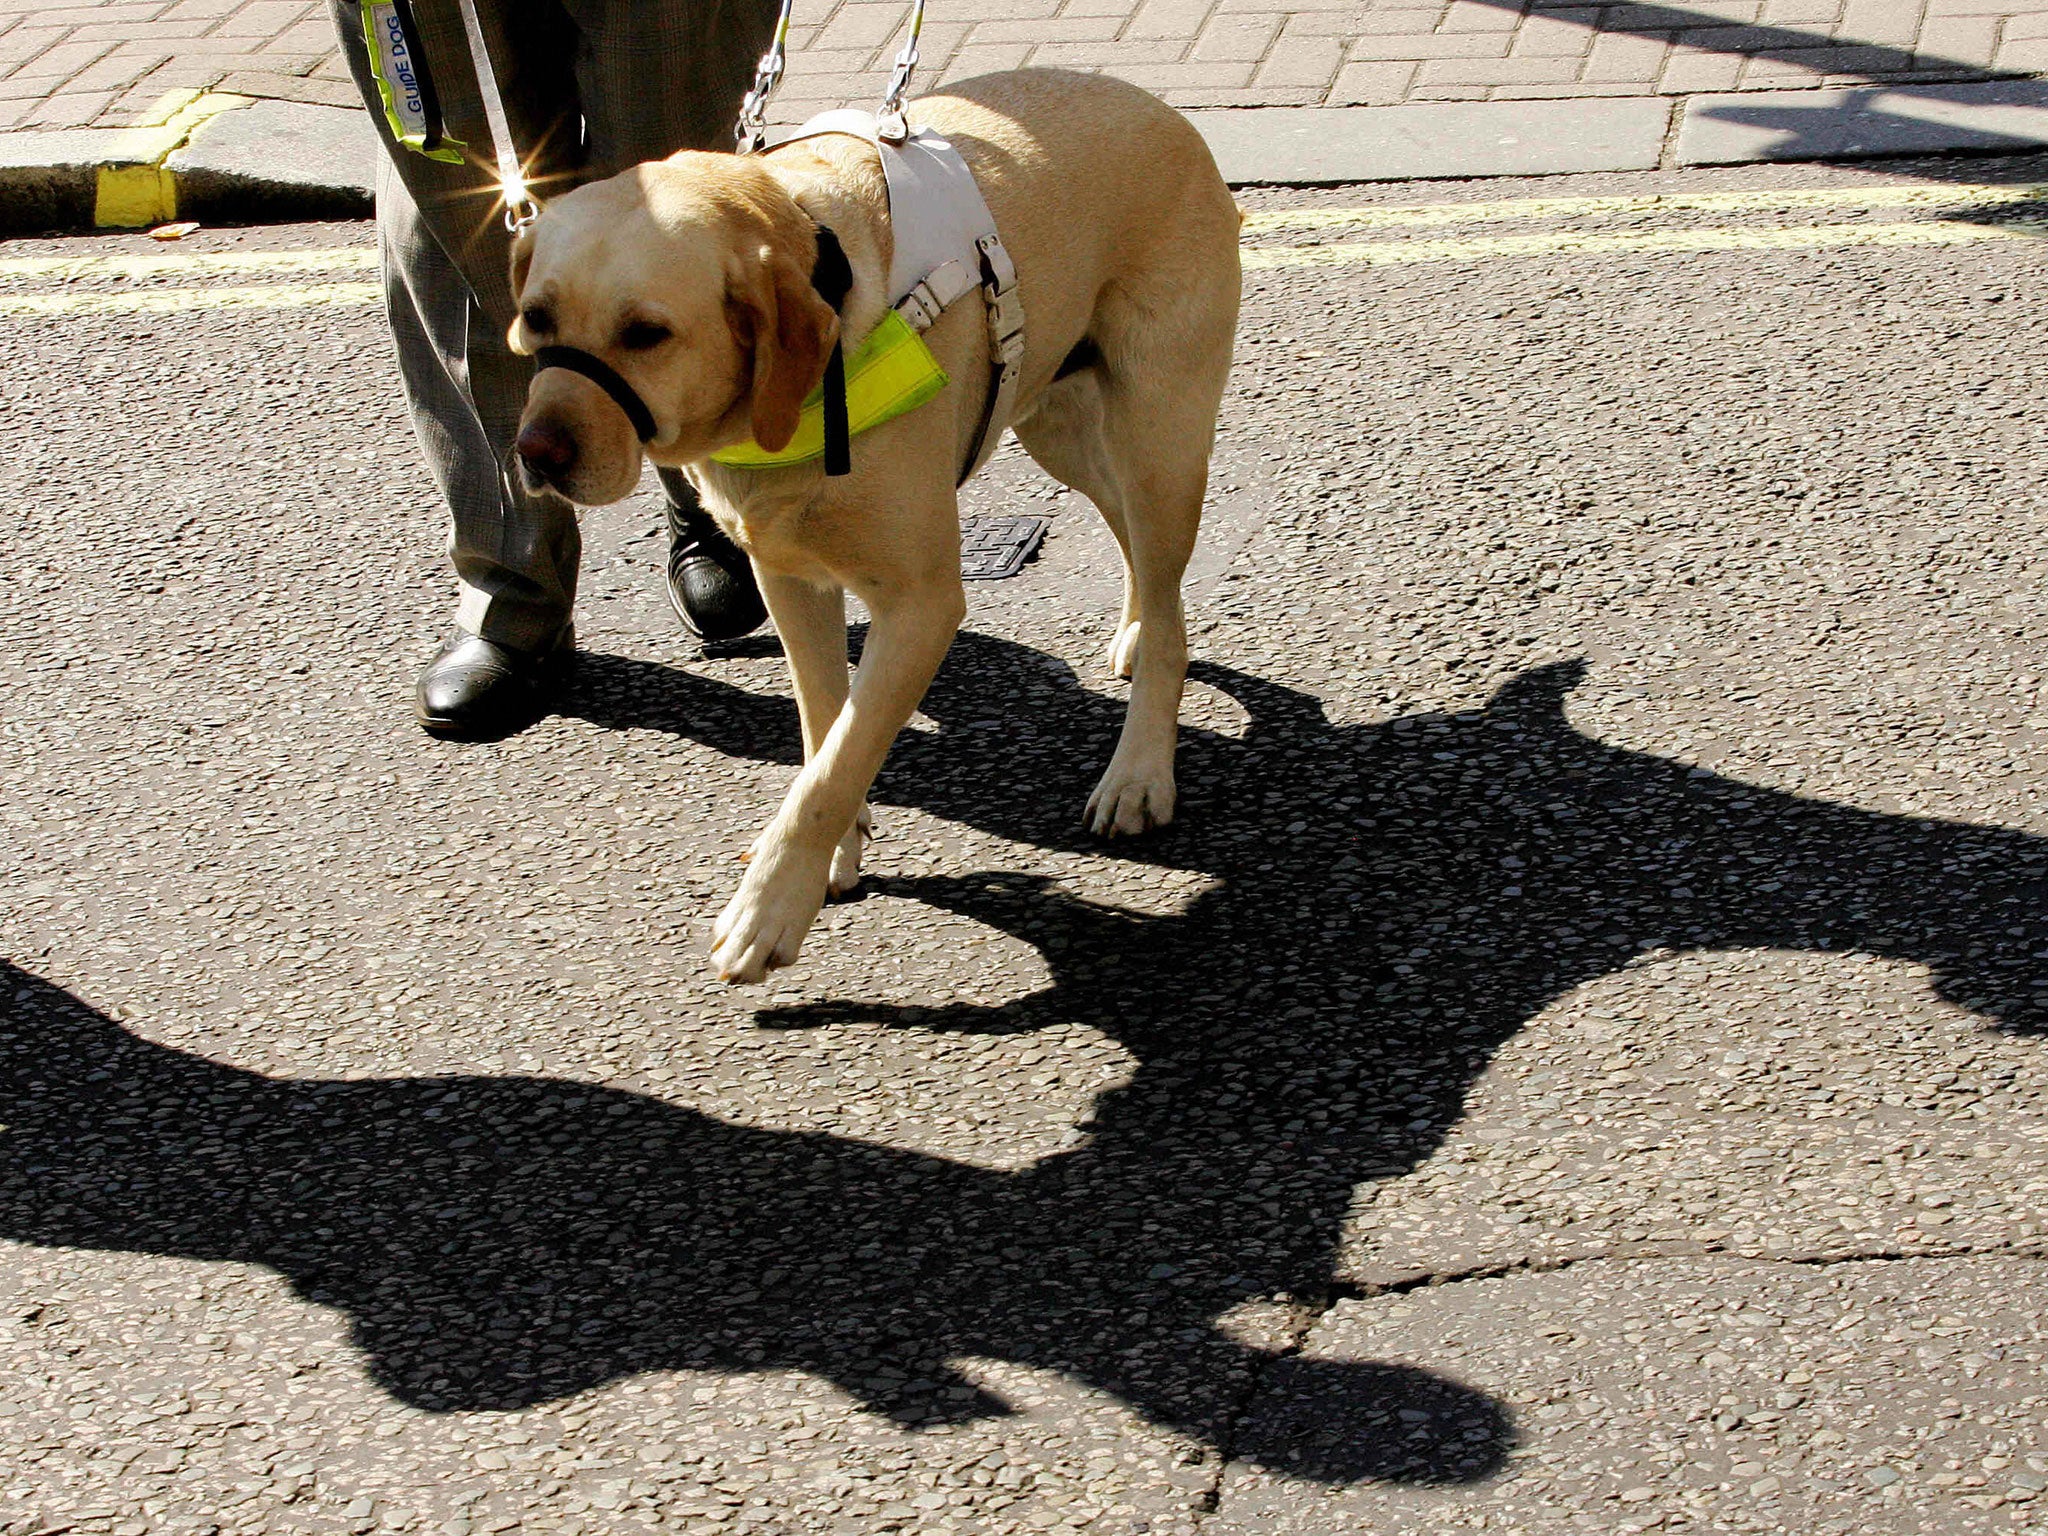 A charity has accused cyclists of making guide-dog owners cower in fear